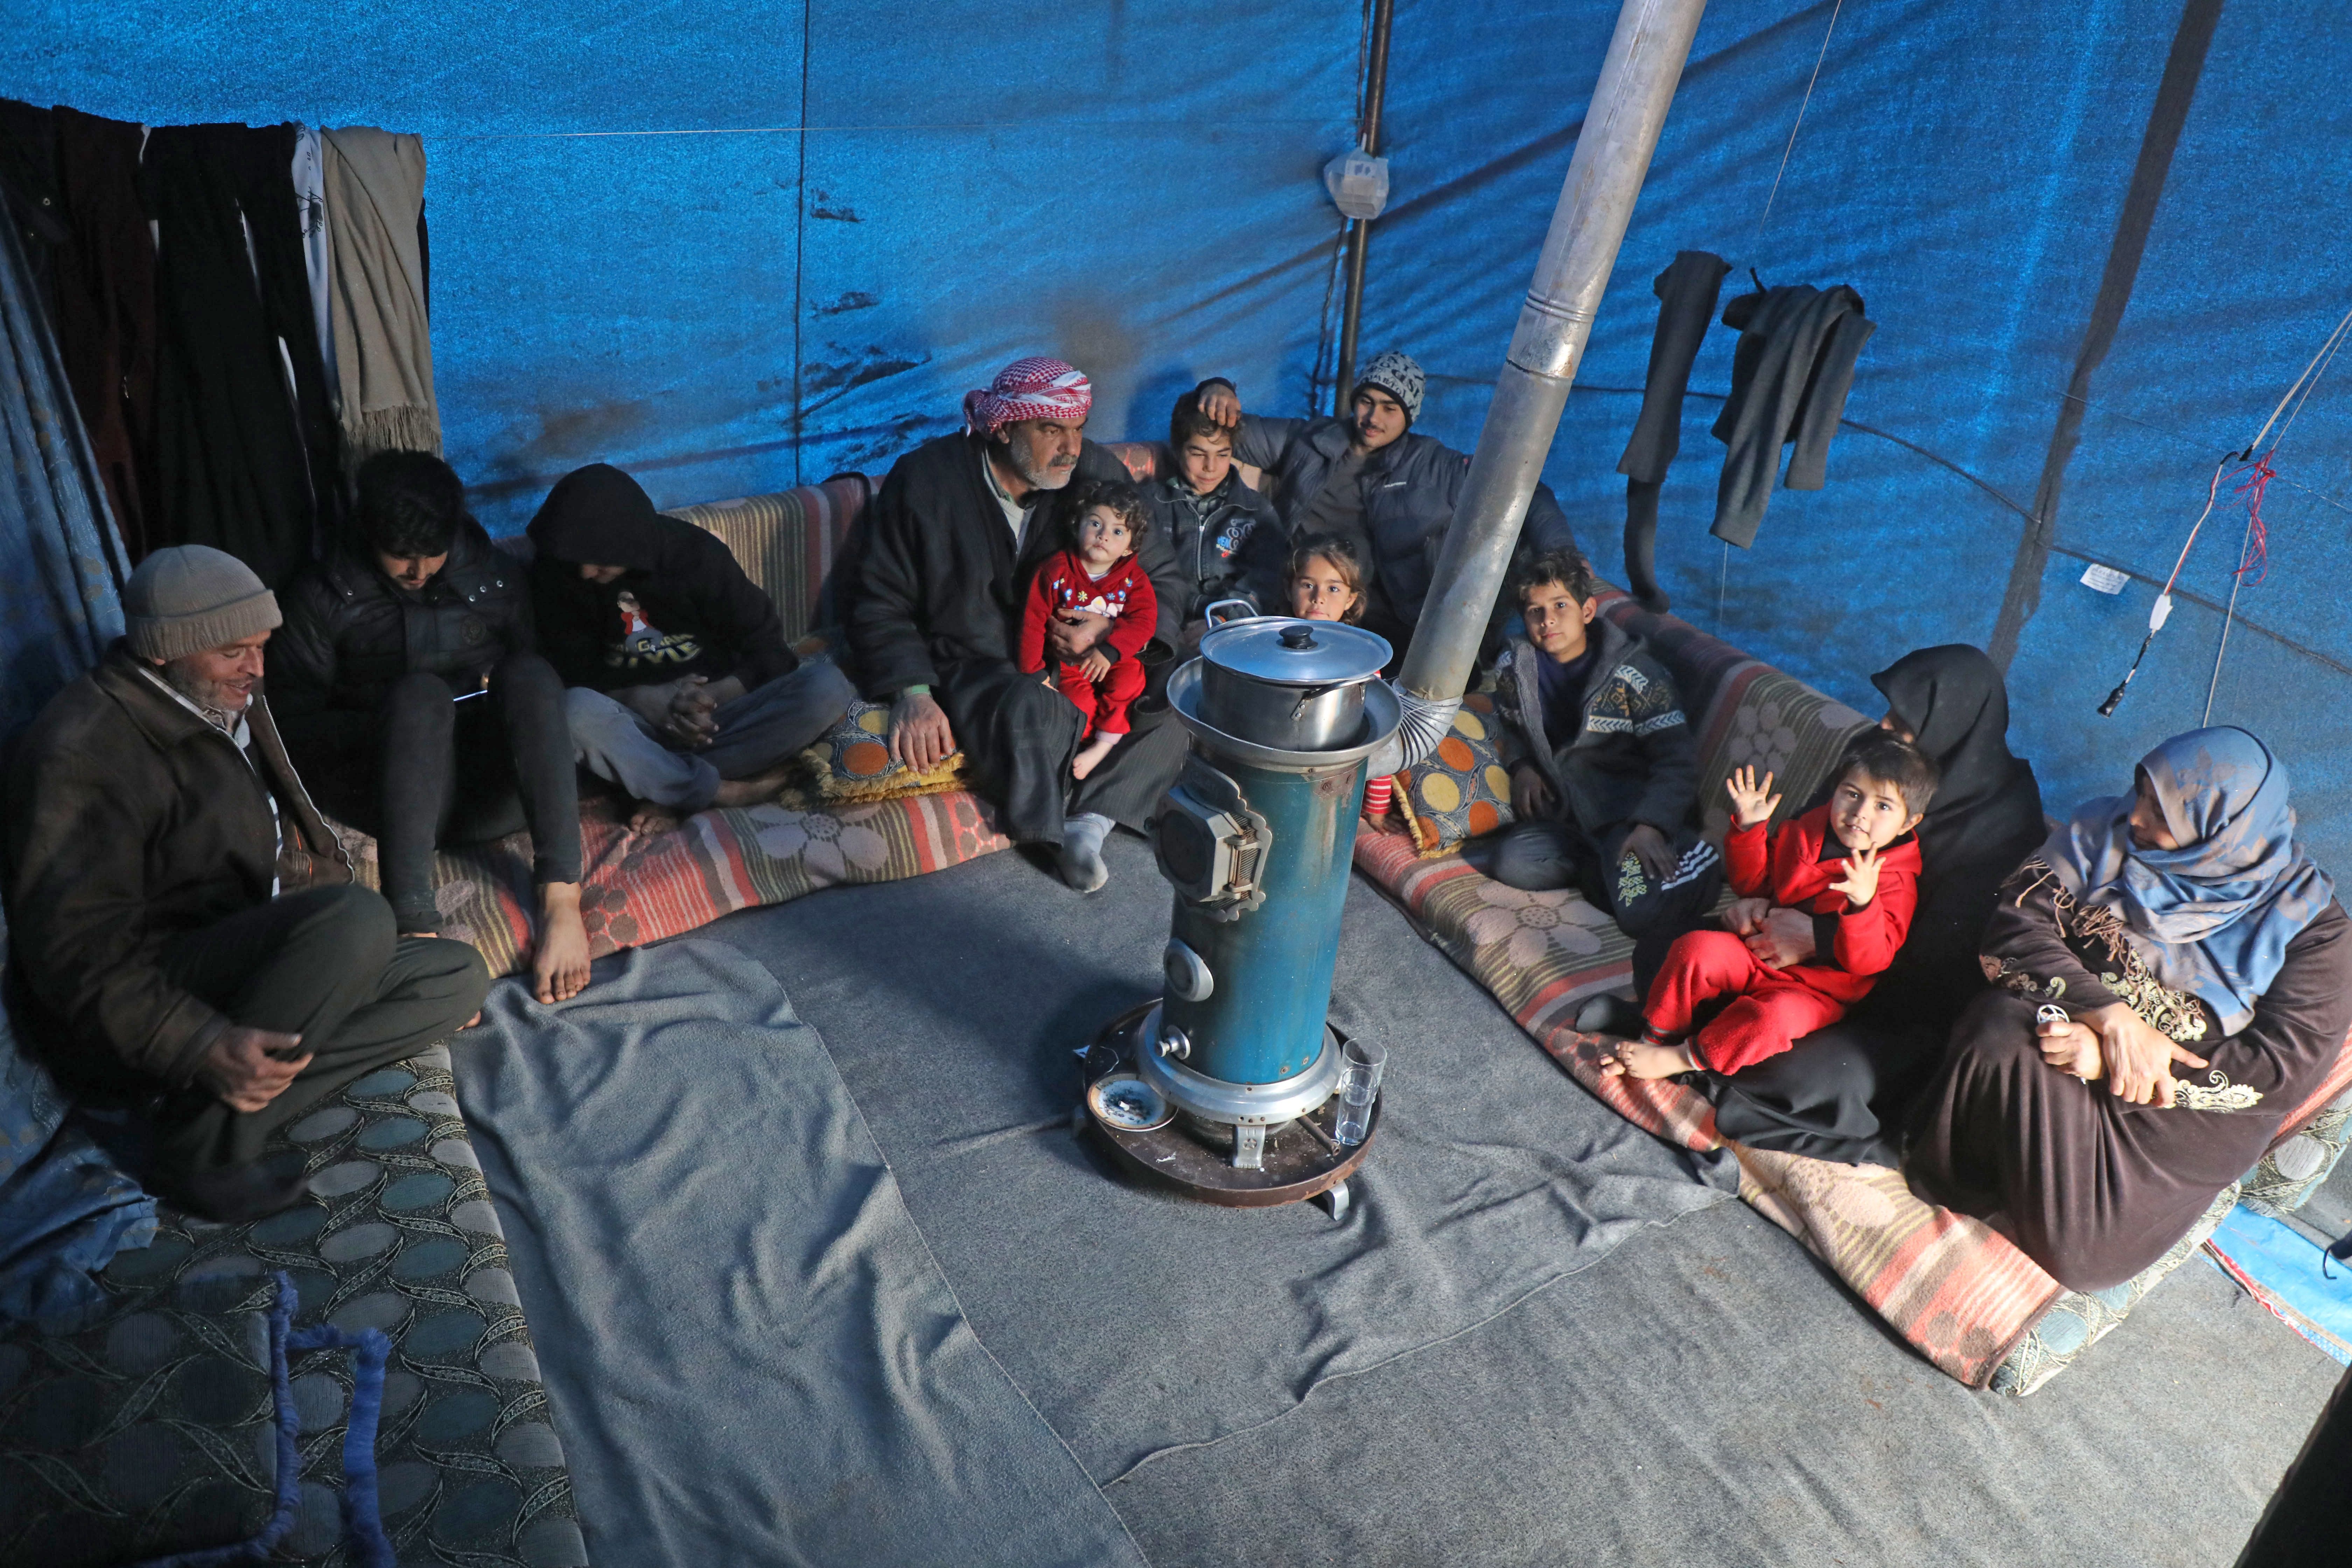 Syrian Abdel Razzak Sallat sit with his family inside a tent at an informal camp for the displaced in Kafr Lusin village on the border with Turkey in Syria's northwestern province of Idlib, on February 21, 2020. - Six months ago, the family fled deadly fighting in Idlib province of northwest Syria, seeking shelter near the border village of Kafr Lusin, where dozens of families live in an informal camp for the displaced. Turkey, which already hosts the world's largest number of Syrian refugees with around 3.6 million people, has placed barbed wire and watchtowers along the wall to prevent any more crossings. (Photo by AAREF WATAD/AFP via Getty Images)